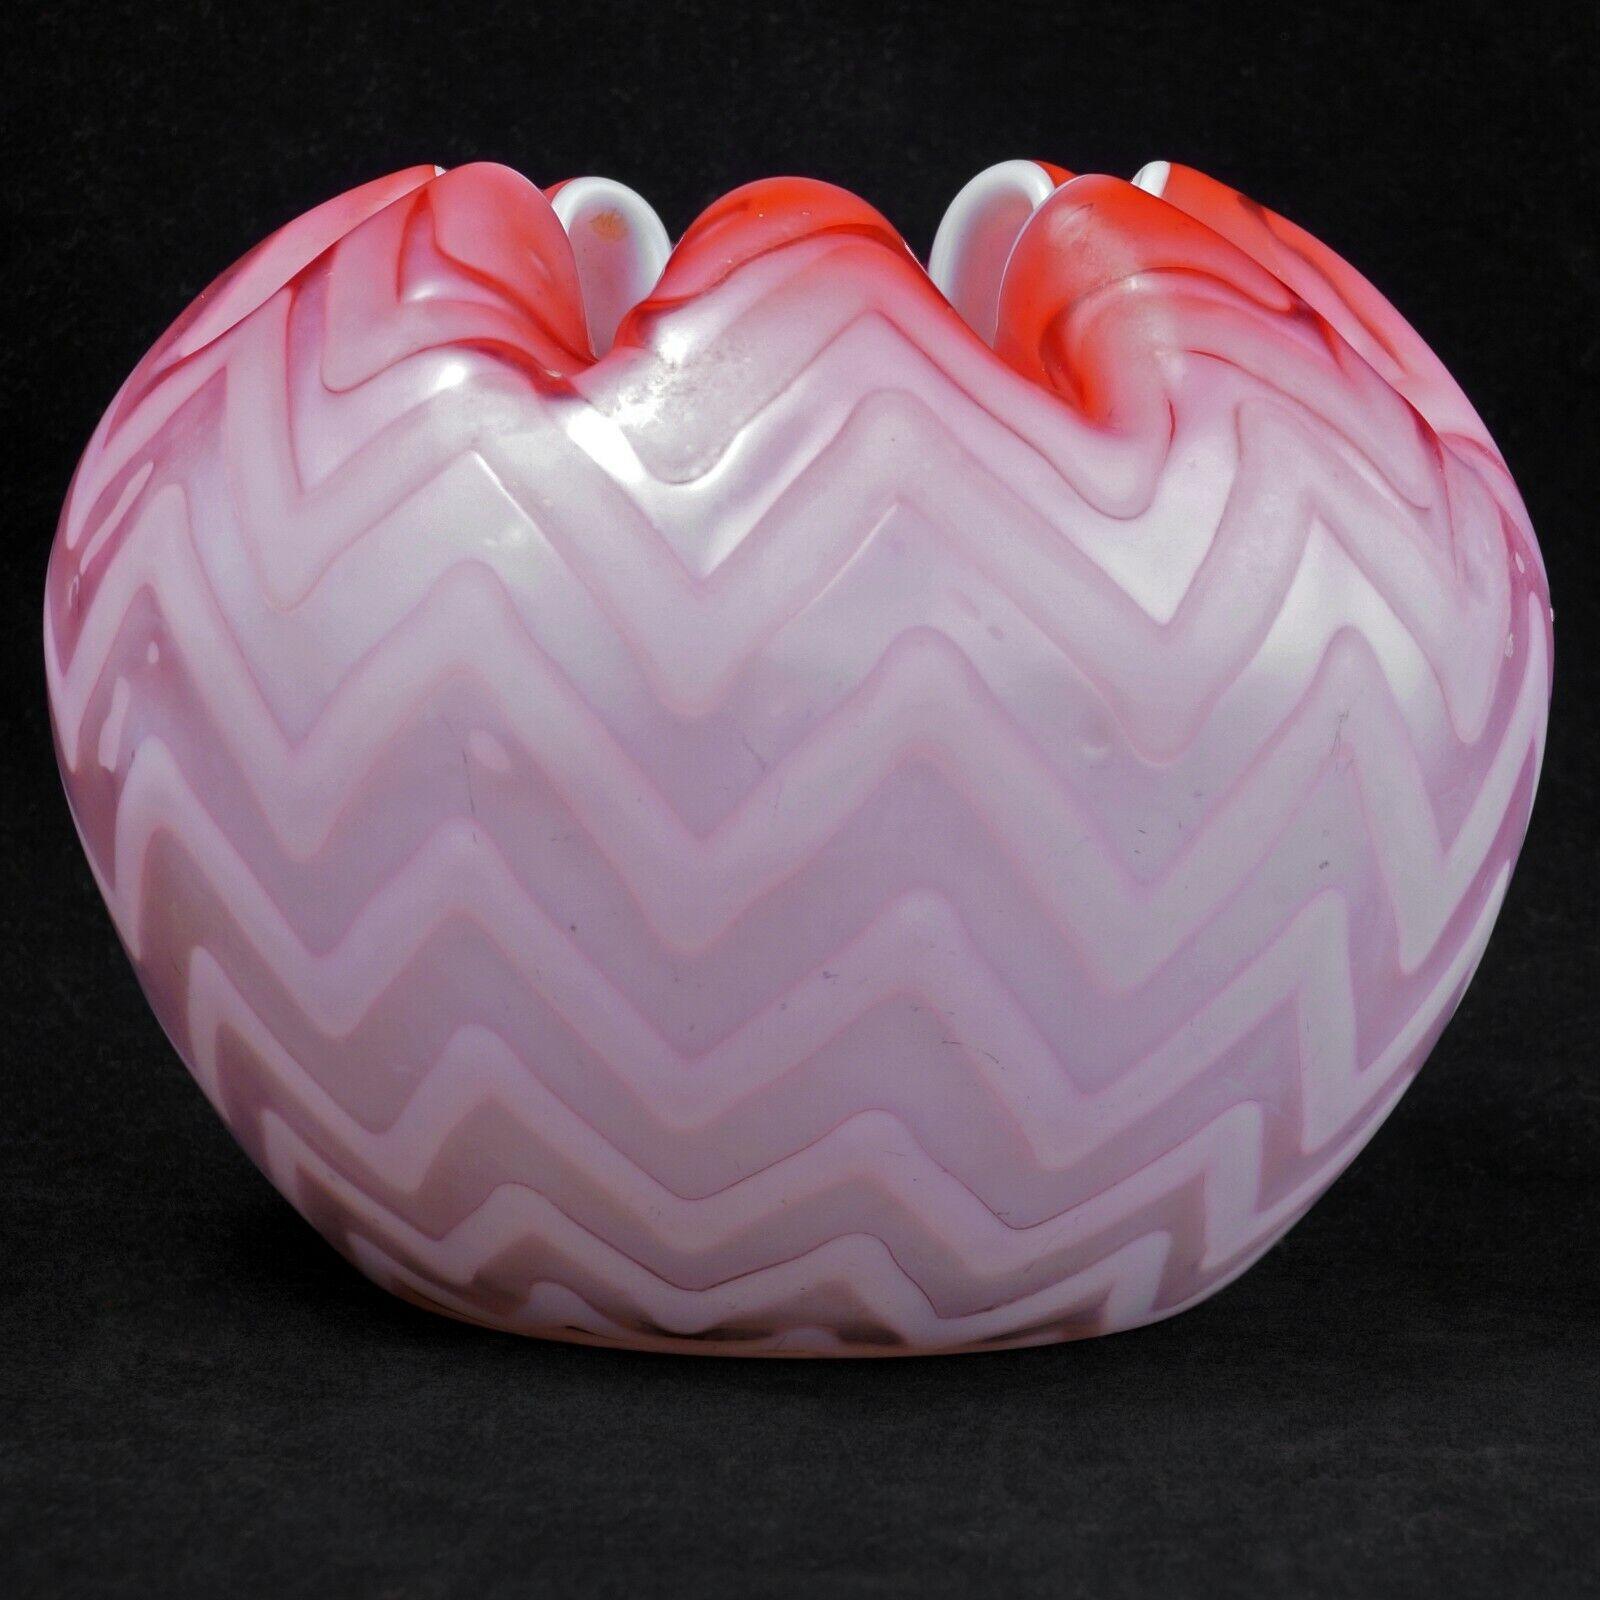 Victorian Cased Satin Cranberry Colored Glass Crimped Edged Vase Late 19th C - Bear and Raven Antiques